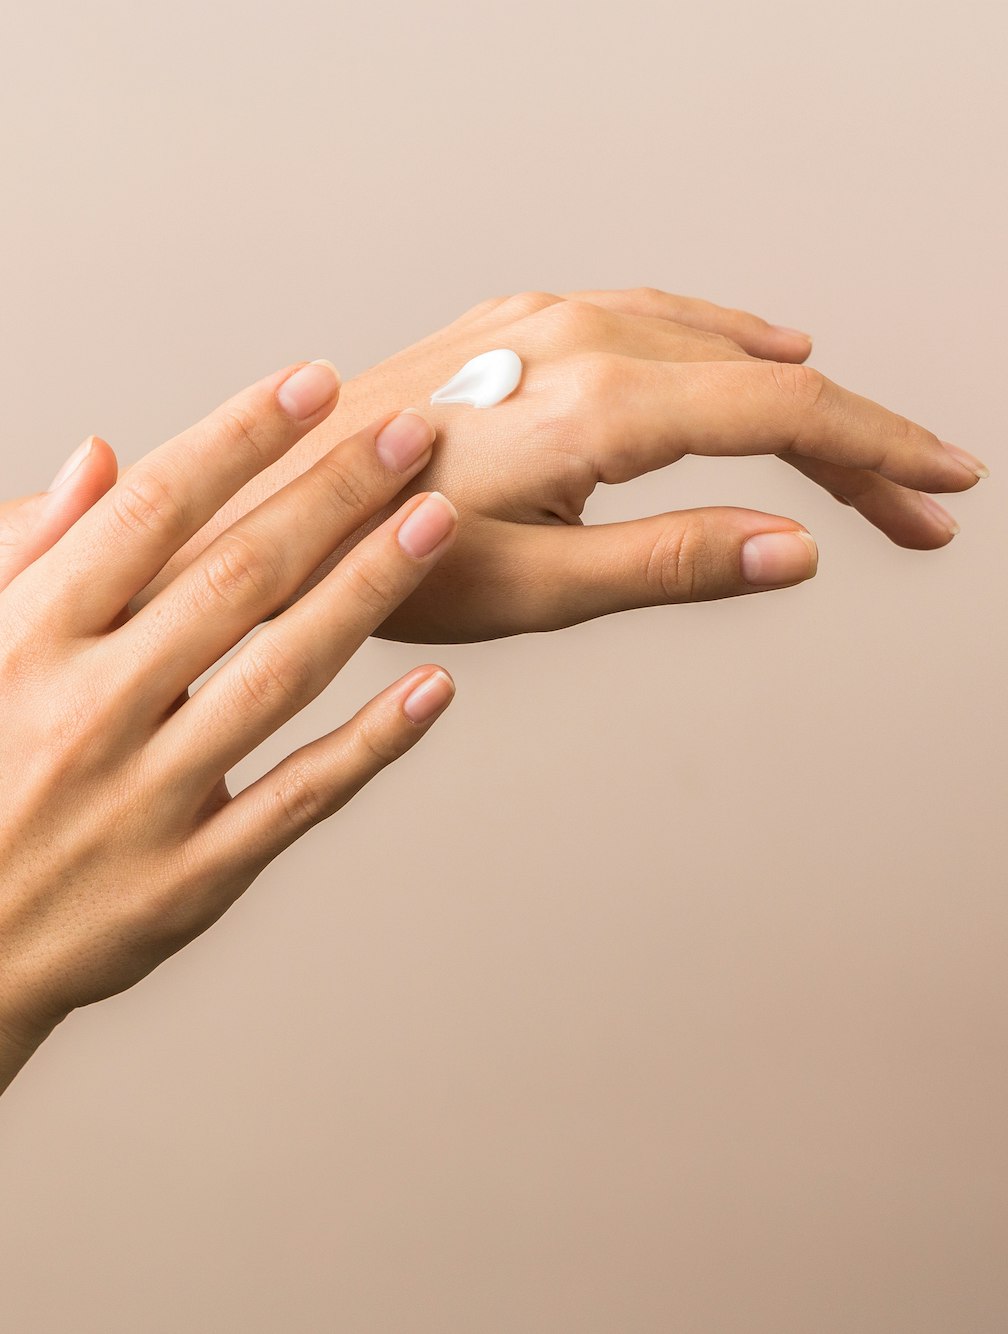 skin care and protection. beautiful hands of a young woman with moisturizer on them